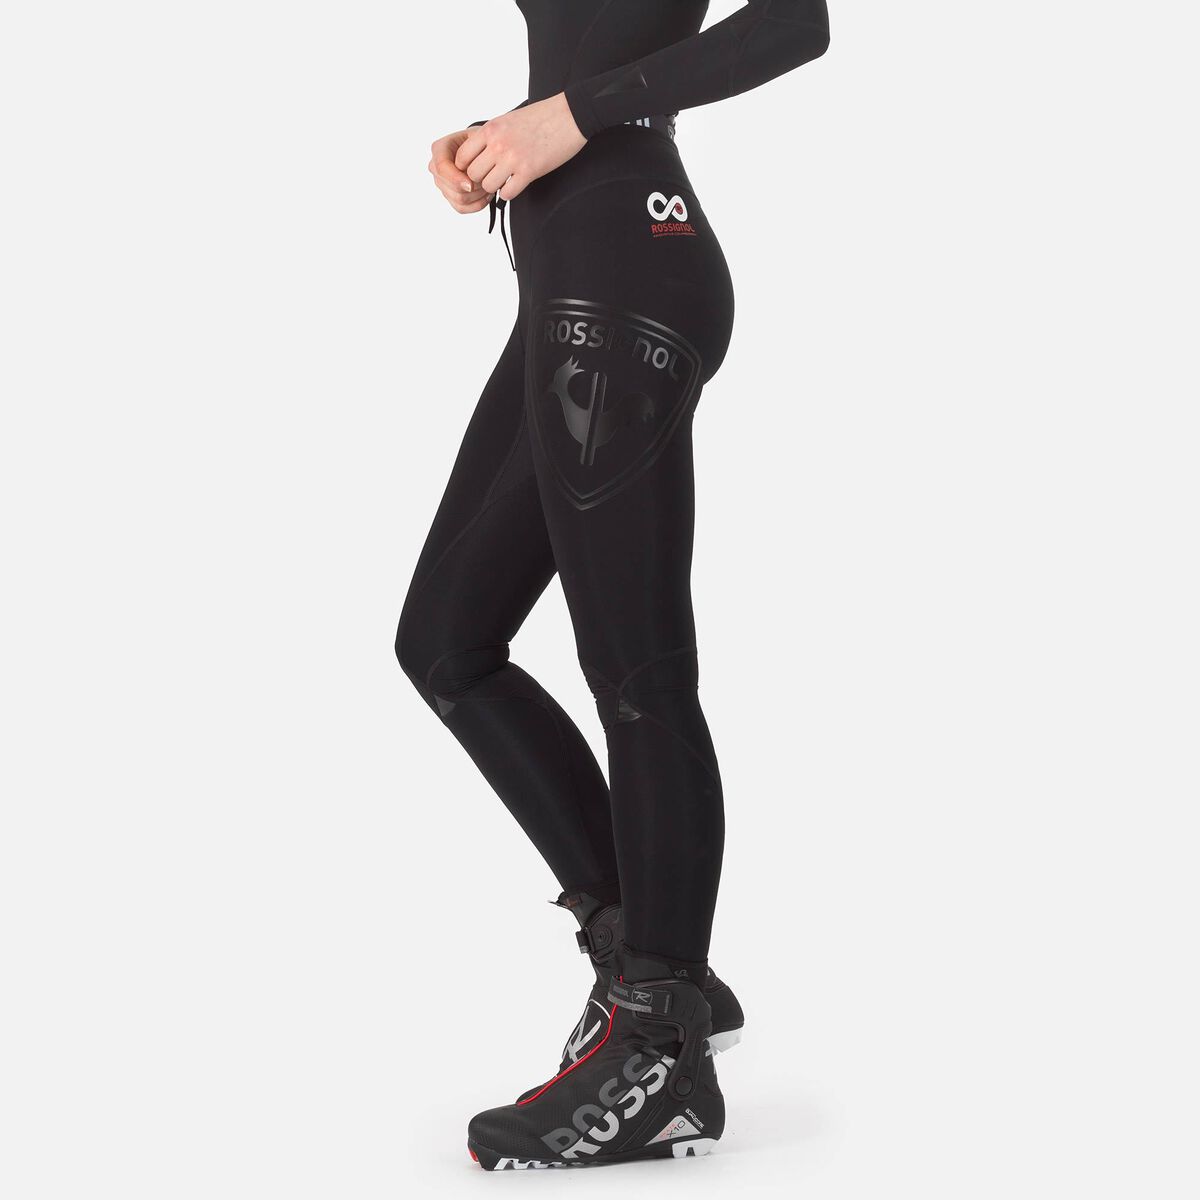 Rossignol Infini Compression Race Tigh - Cross-Country Ski Trousers Women's, Buy online